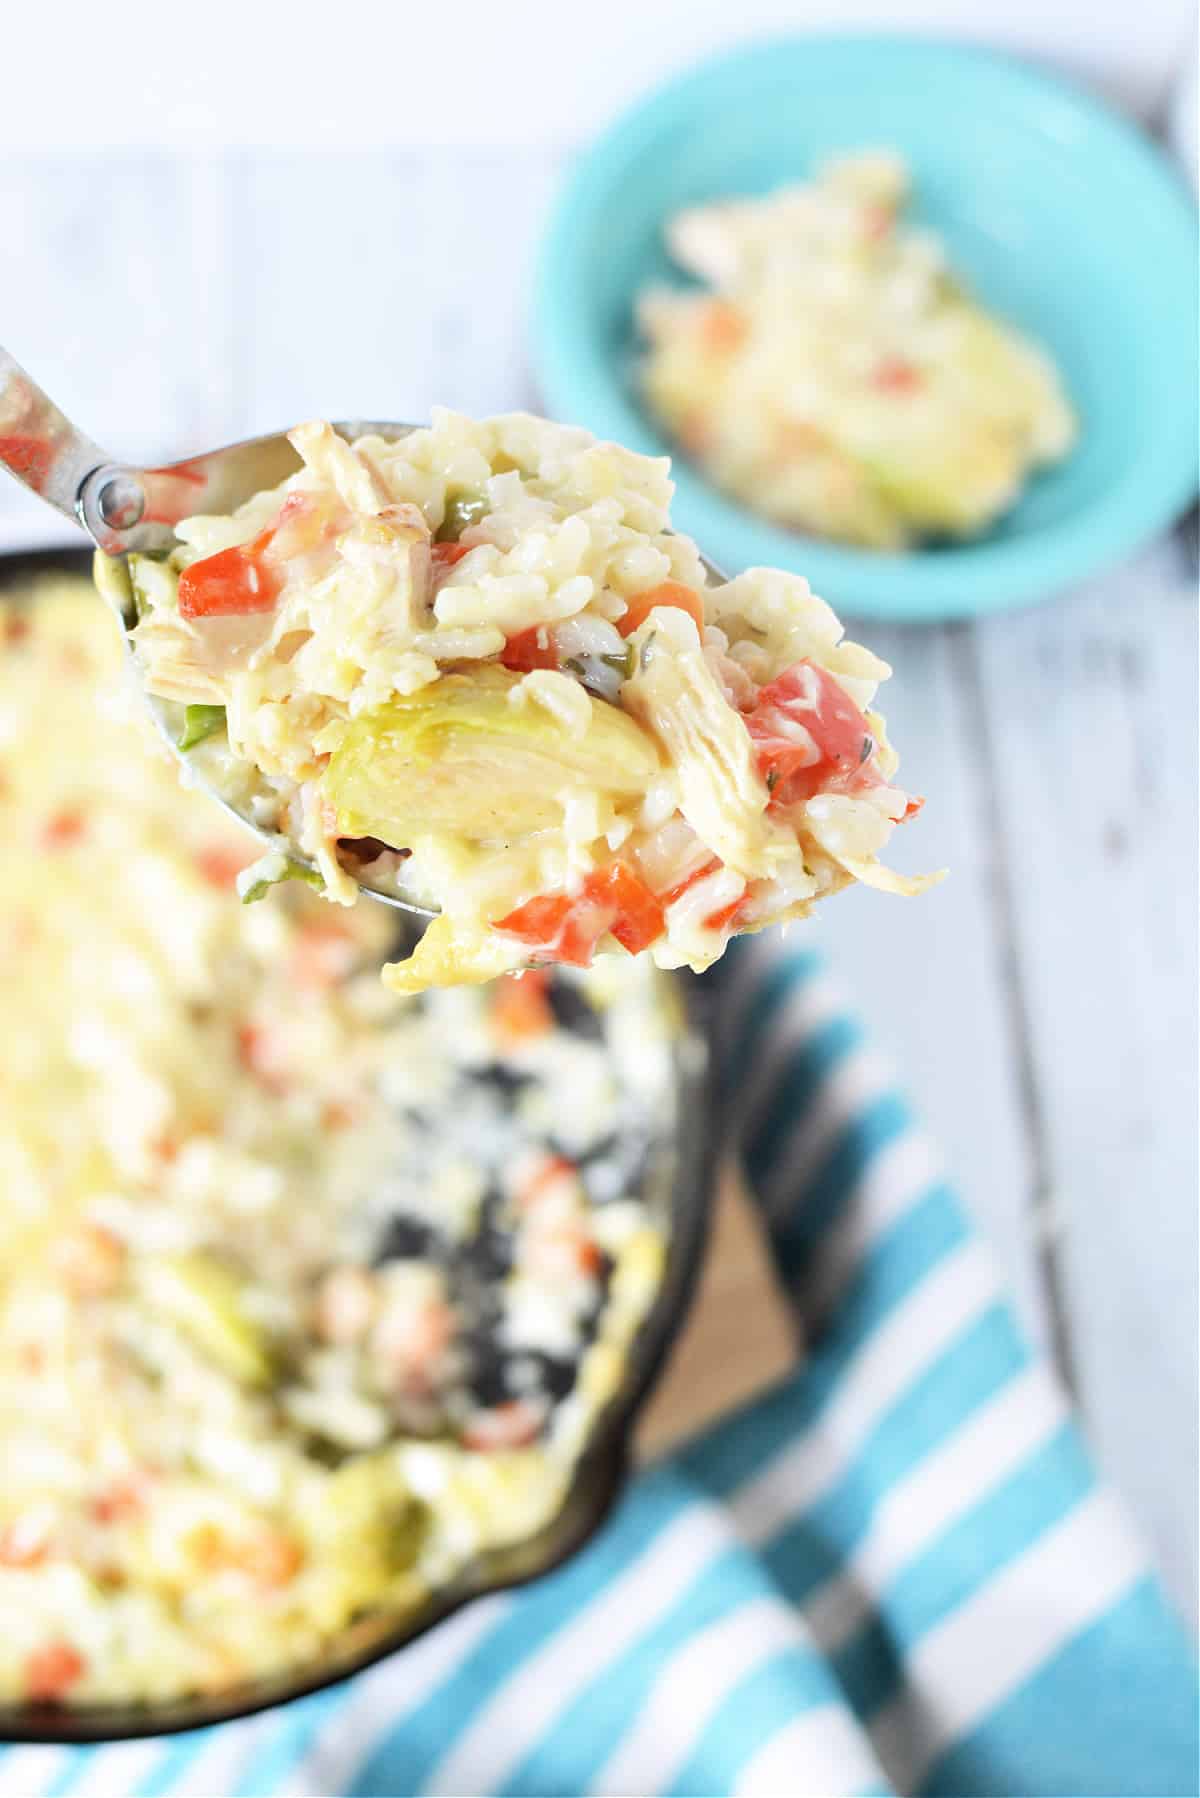 Chicken and Brussels Sprouts Casserole